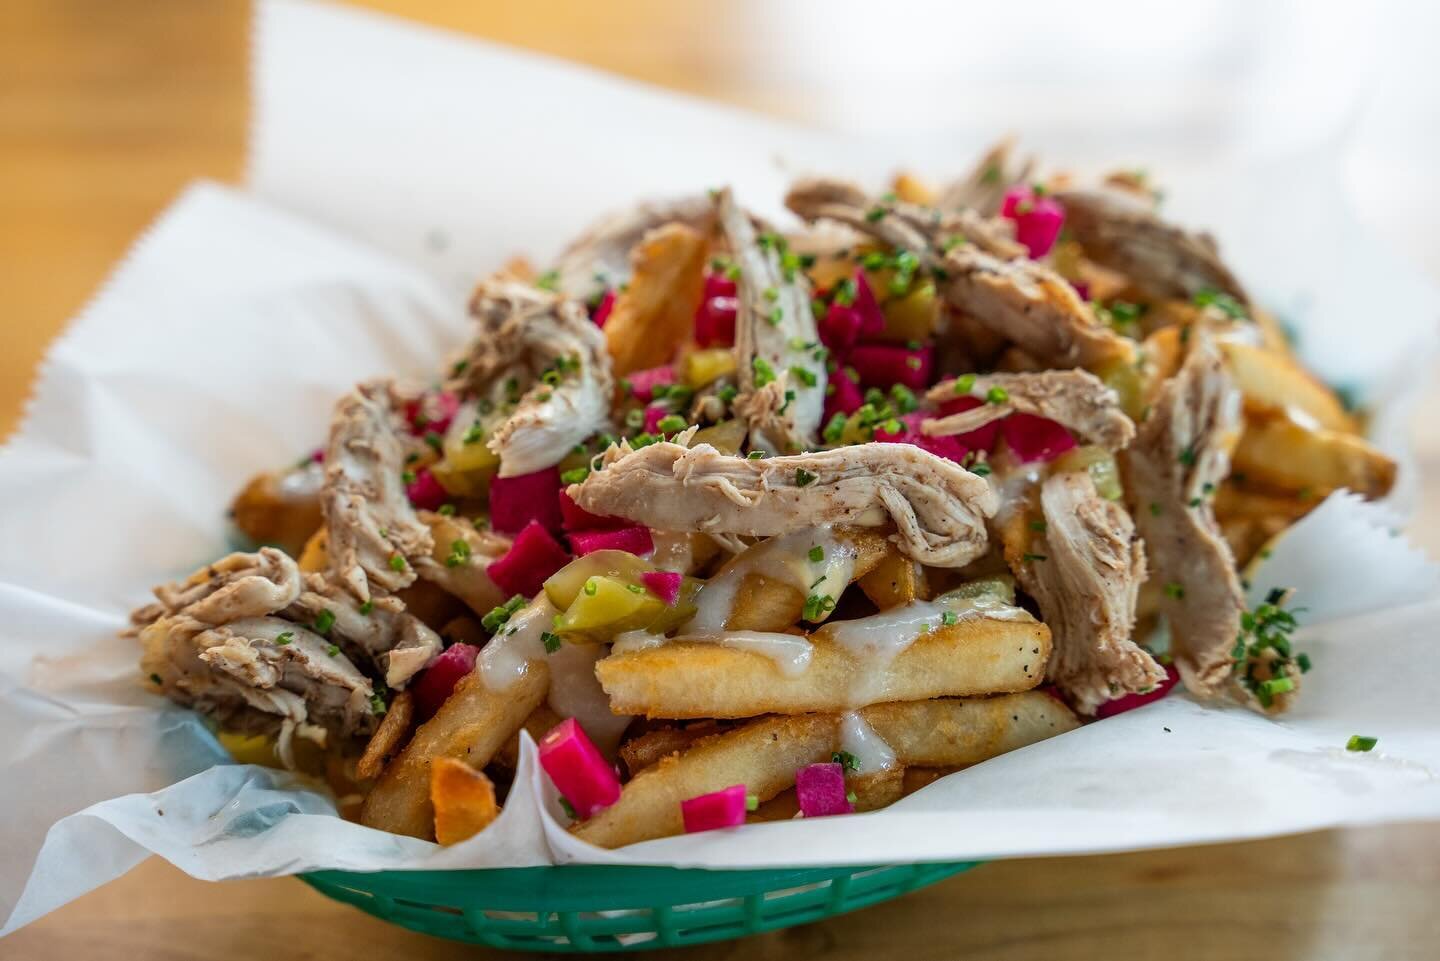 Check out some more of what we will be serving at Habibi Night!⁠ Keep your slot open for tomorrow night starting at 6pm at @winnieshouston 
⁠
Mezze Sampler⁠
⁠
Cool Ranch Labneh⁠
Nashville Hot Mushroom Hummus⁠
Pita Chips &amp; Pita Bread⁠
Zataar Wings